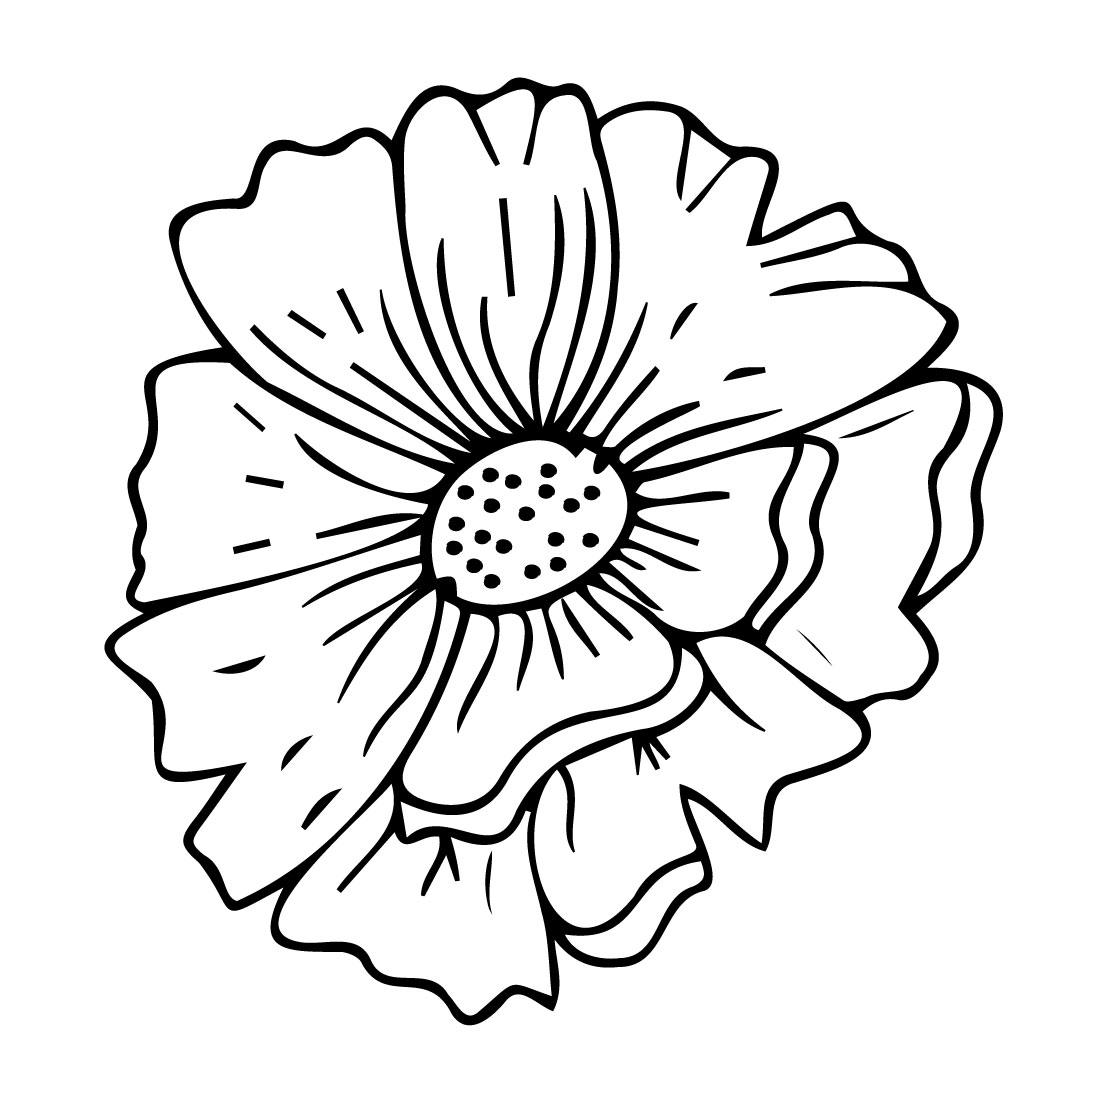 Some simple flower in an outline style.